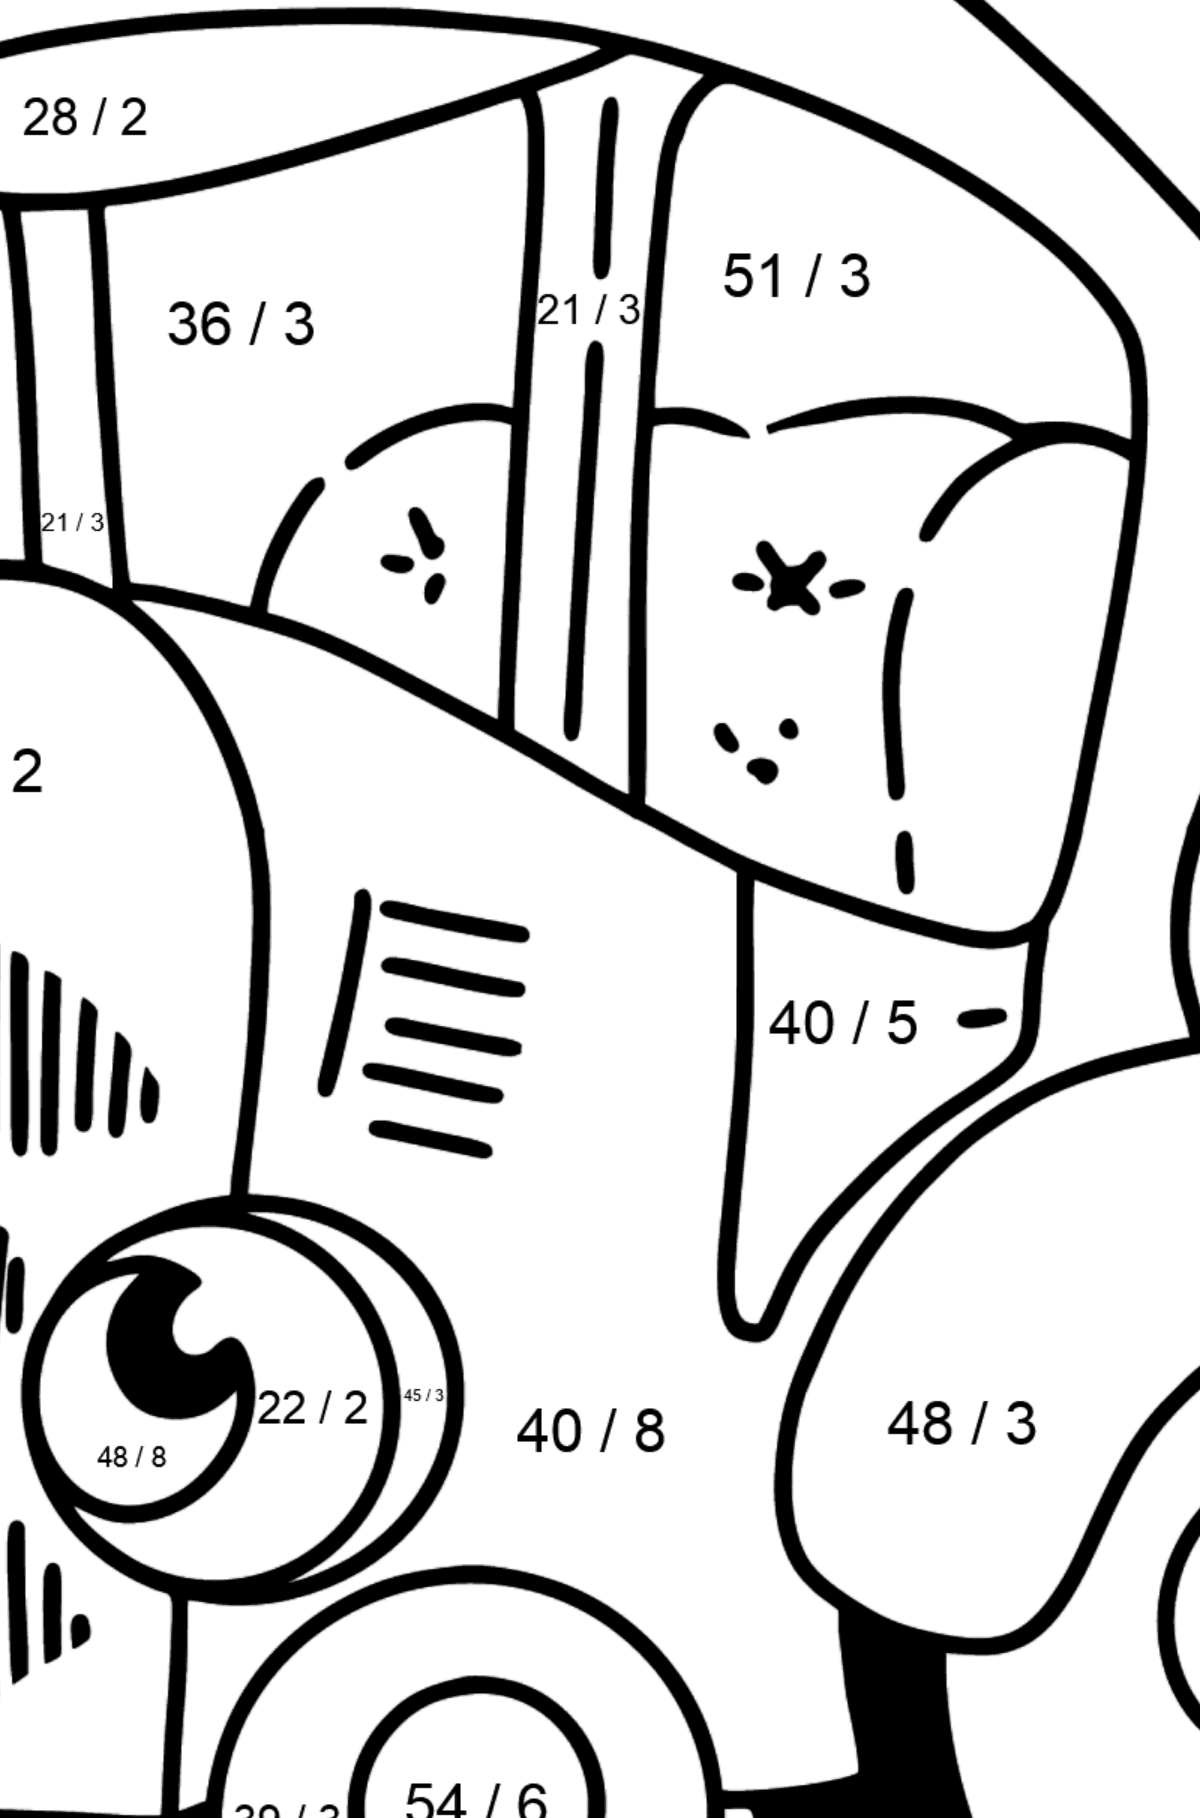 Blue Tractor coloring page - Math Coloring - Division for Kids